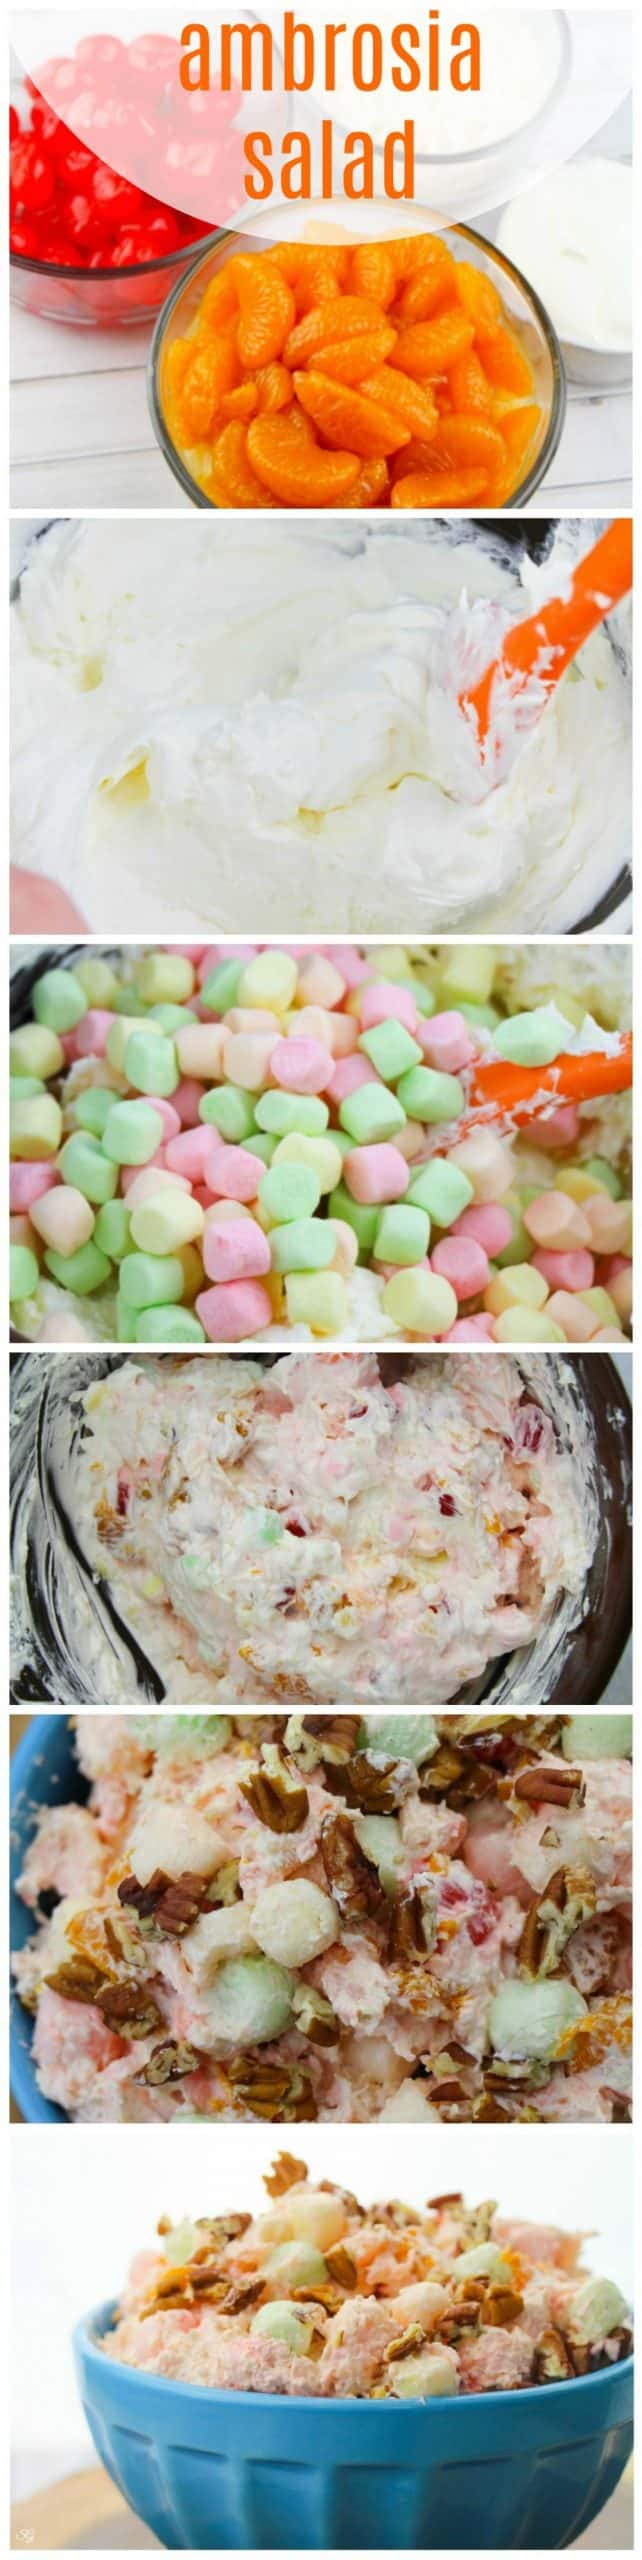 How to make ambrosia salad. A tutorial to make ambrosia salad with step by step photos and instructions